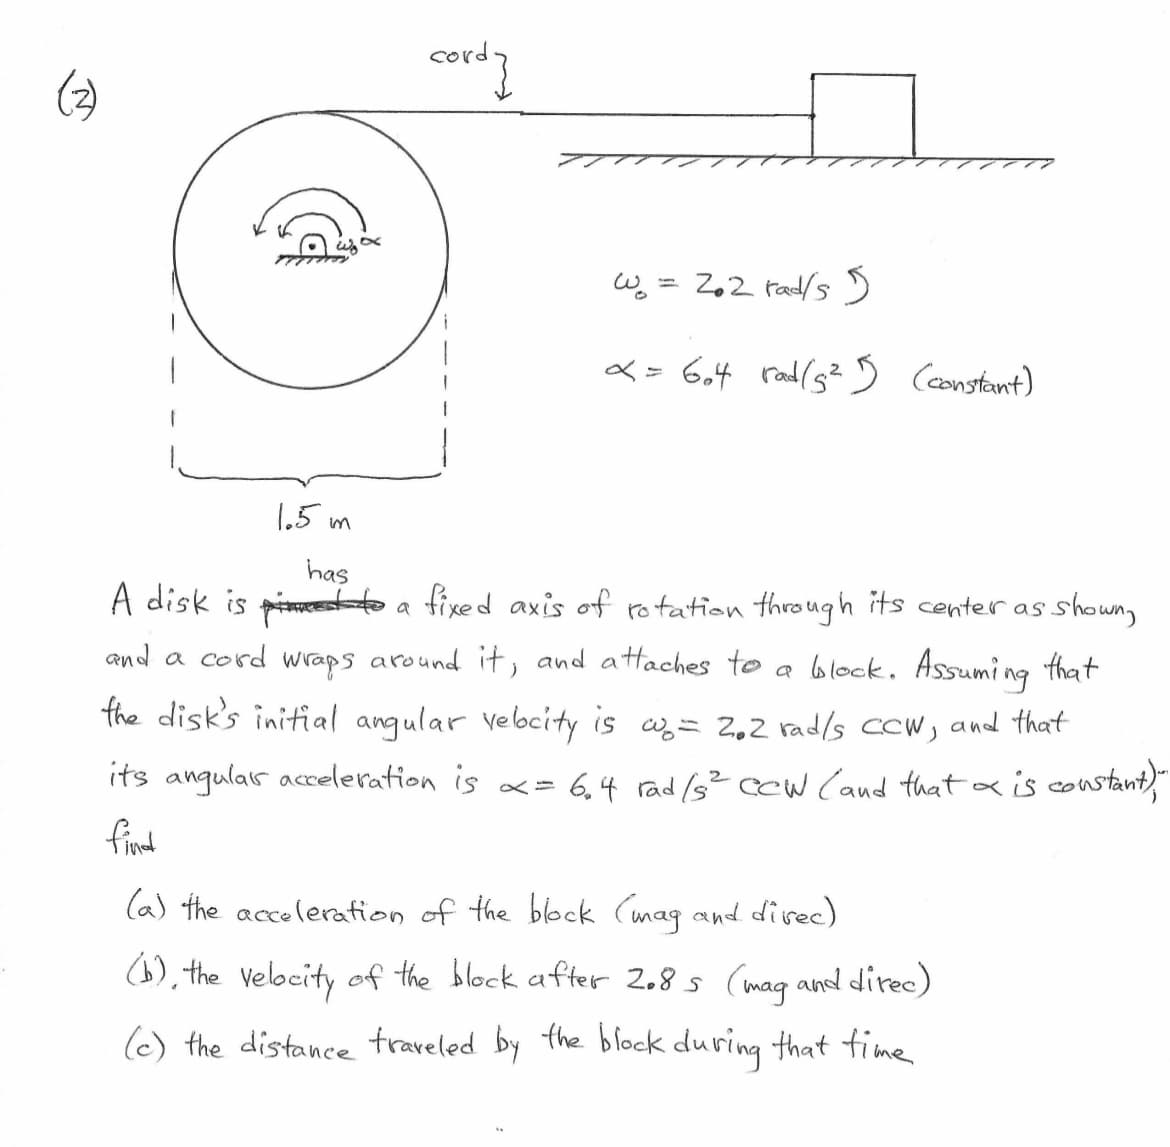 LG
1.5m
has
cordy
W₂ = 2₁2 rad/s 5
x = 604 rad/5²15) (constant)
A disk is
to a fixed axis of rotation through its center as.
and a cord wraps around it, and attaches to a block. Assuming that
the disk's initial angular velocity is w₂ = 2.2 rad/s CCW, and that
its angulars acceleration is x = 6₁4 rad /s² cew (and that a is constant),""
find
(a) the acceleration of the block (mag and direc)
(b), the velocity of the block after 2.8s (mag and direc)
(c) the distance traveled by the block during that time.
• shown,